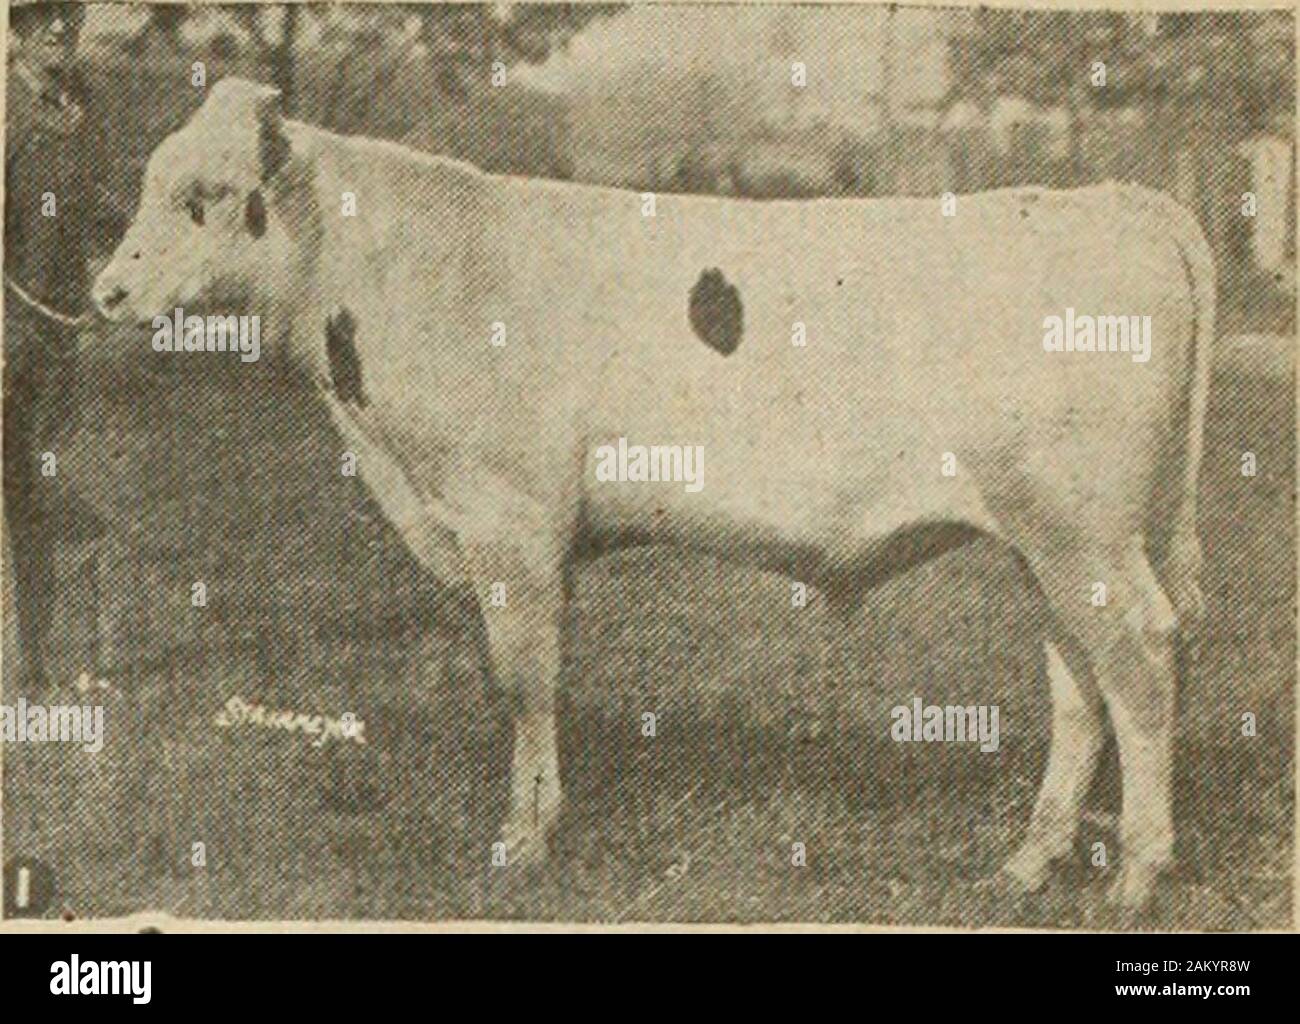 Farmer's magazine (January-December 1920) . rom the prize winning herds ofOxford. Oxford Holsteins cap-tured all but one of the prizesat London this year and wellover half of the prize money atToronto. The consiirnors are:—Arbograst Bros., Sebrlngville.A. E. Cornwell & Son. Norwich.Jas. G. Currie & Sons, Ingersoll.T. H. Dent & Son, Woodstock.Andrew Dunn, Ingersoll.Haley & Lee, Springford.M. S. Haley & Son. Springford.J. B. Hanmer, Norwich.Geo. Hill, Burgessville.Chas. Hilliker, Burgessville.E. D. Hilliker, Burgessville.Fred. Hilliker, Burgessville.A. E. Hulet, Norwich.J. W. Innes & Son, Woodst Stock Photo